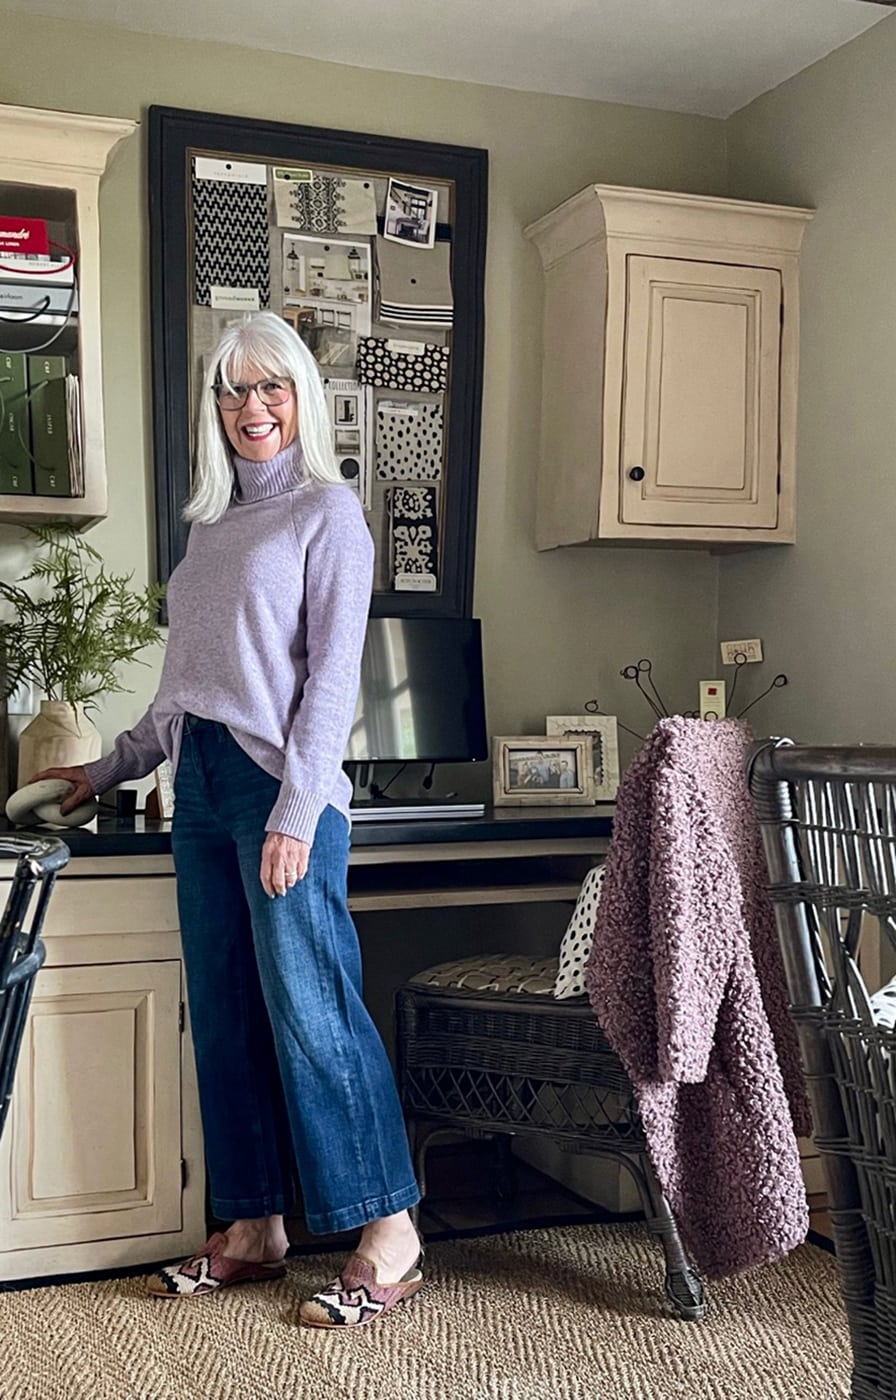 cindy hattersley in j crew sweater and banana republic jeans & artemis mules in her office 